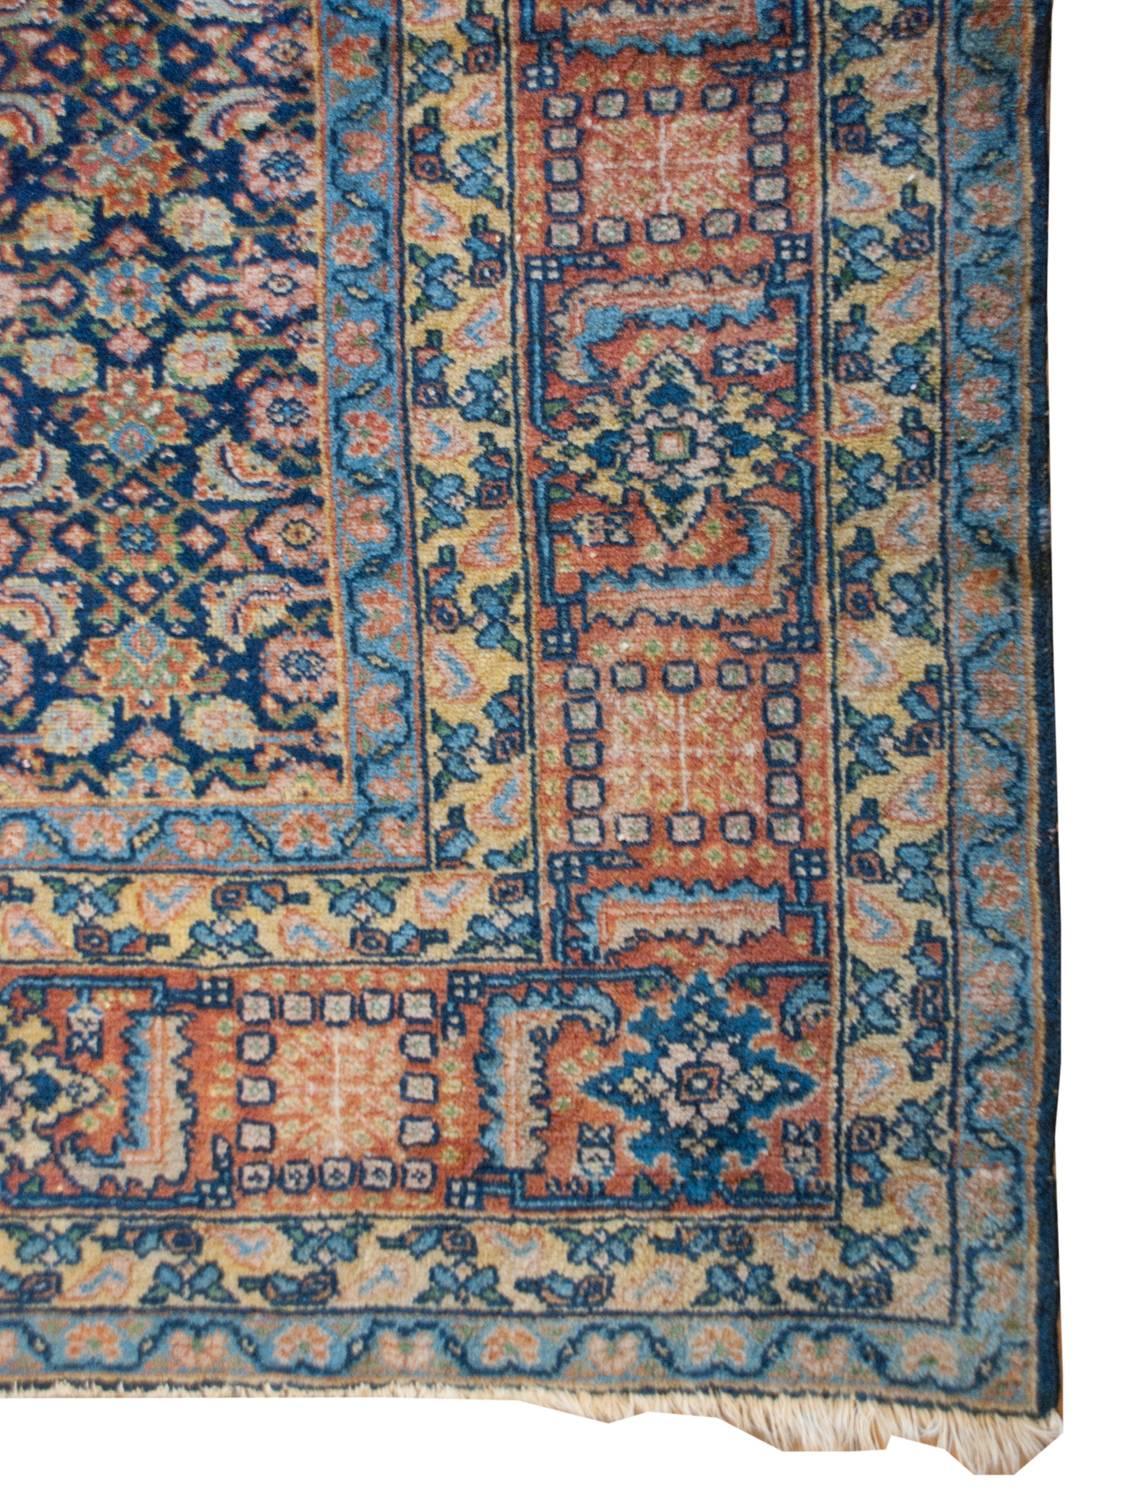 An exceptional 19th century Persian Malaya rug with an intensely woven leaf, floral and vine pattern, woven in multicolored wool on an indigo background. The border is wide, composed of five bands. The central band is fantastic with a stylized